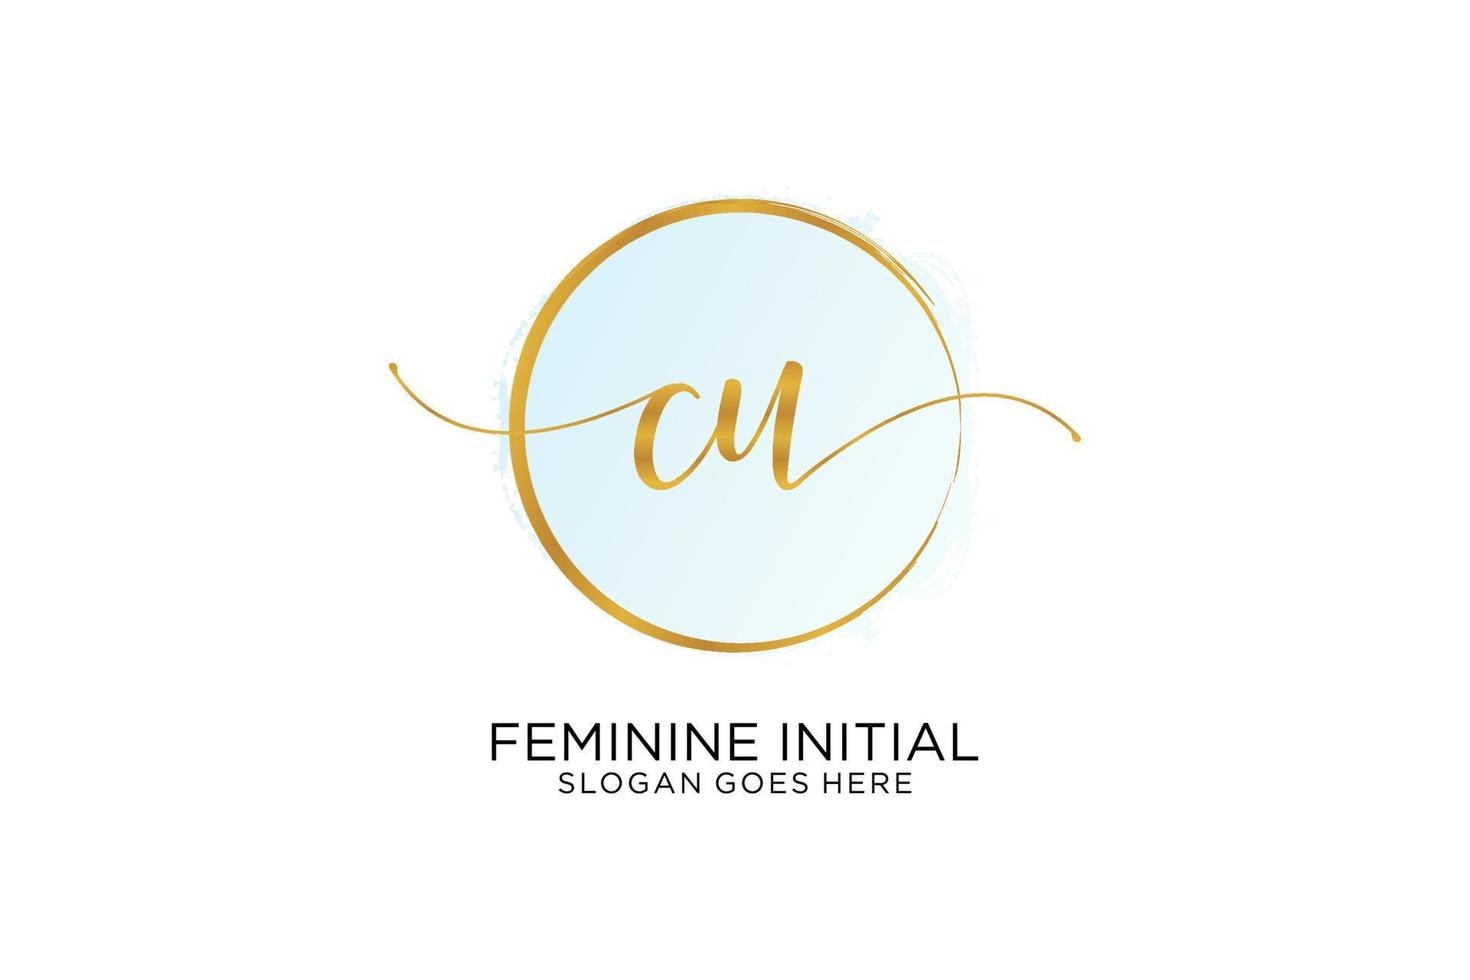 Initial CU handwriting logo with circle template vector signature, wedding, fashion, floral and botanical with creative template.